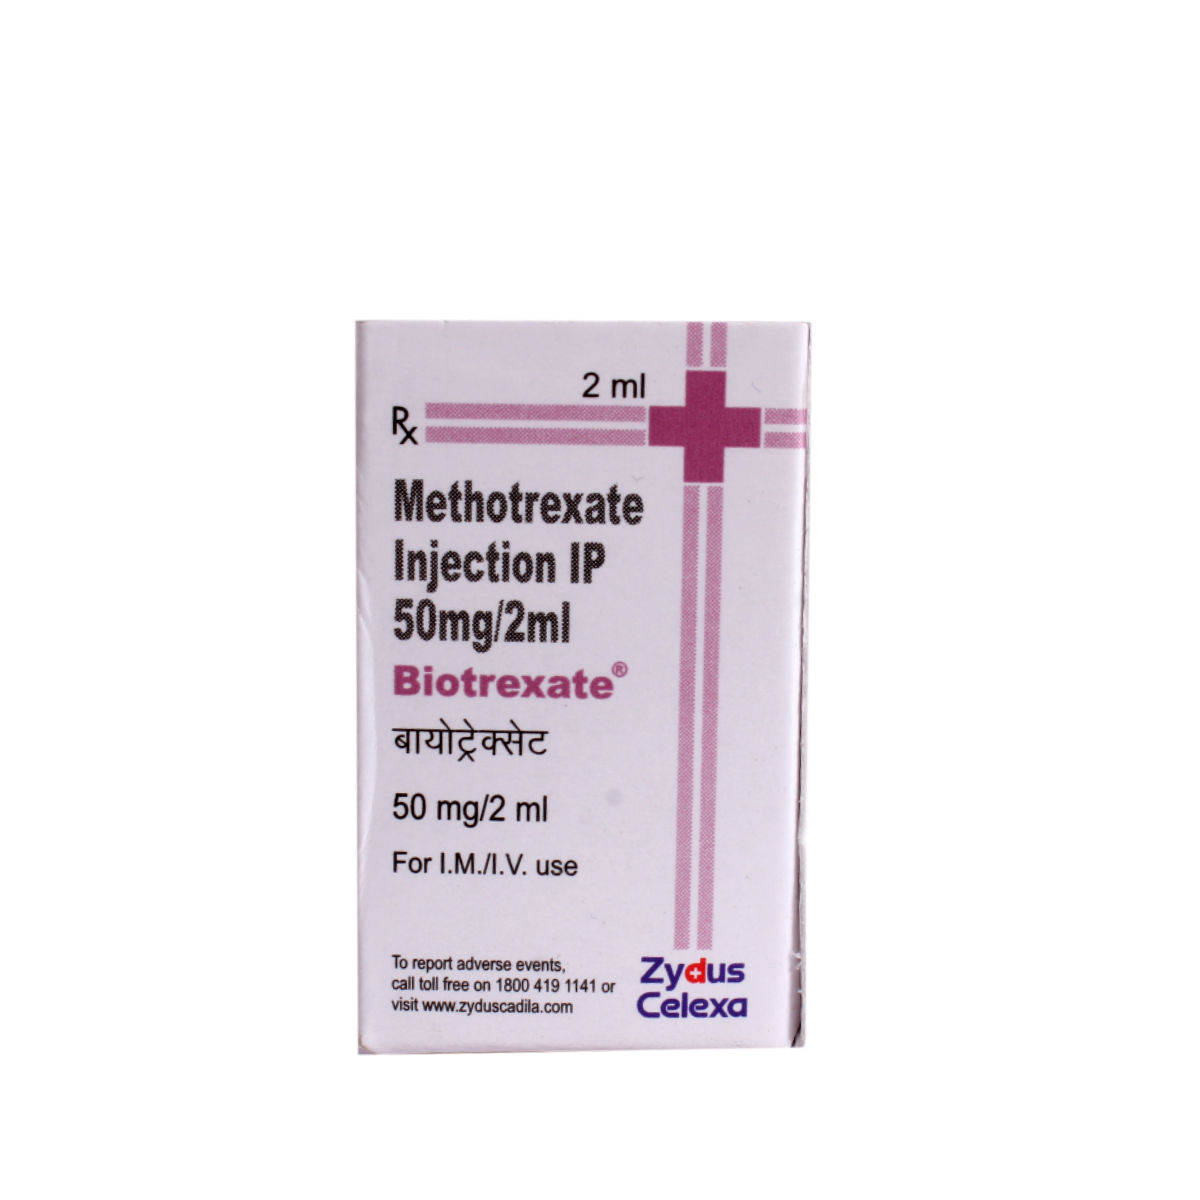 BIOTREXATE 50MG INJECTION 2ML, Pack of 1 Injection